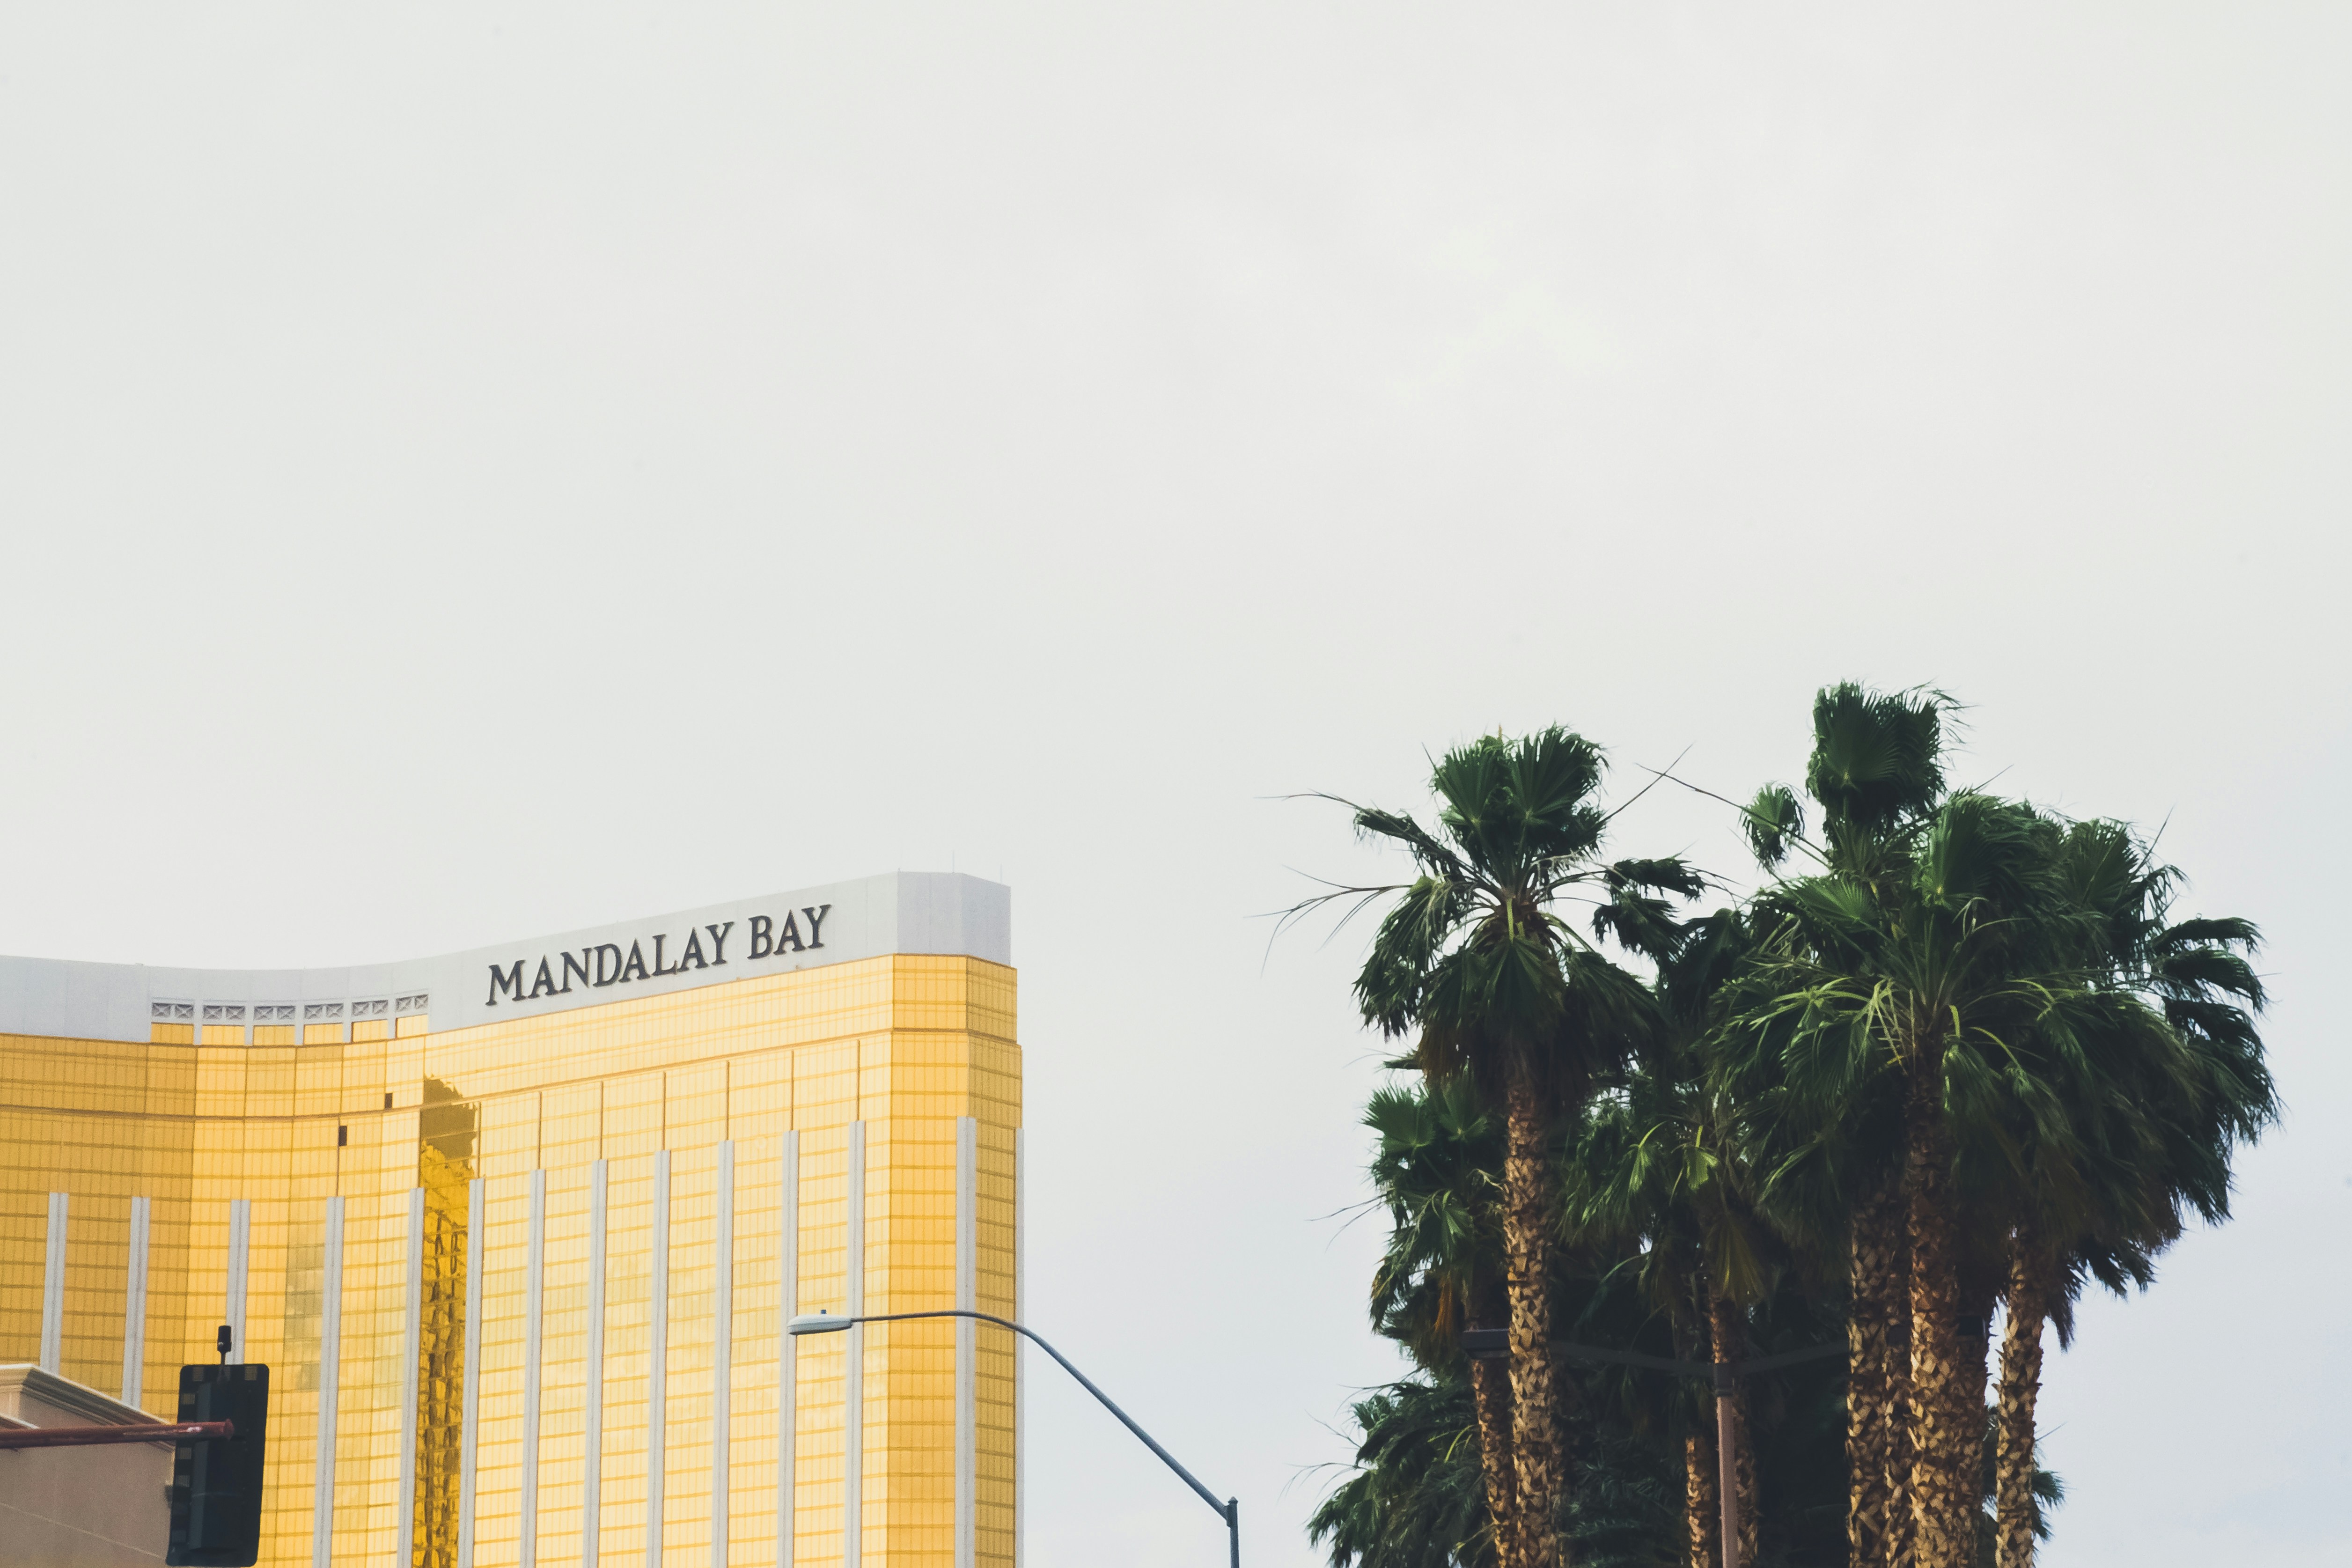 Choose from a curated selection of Las Vegas photos. Always free on Unsplash.